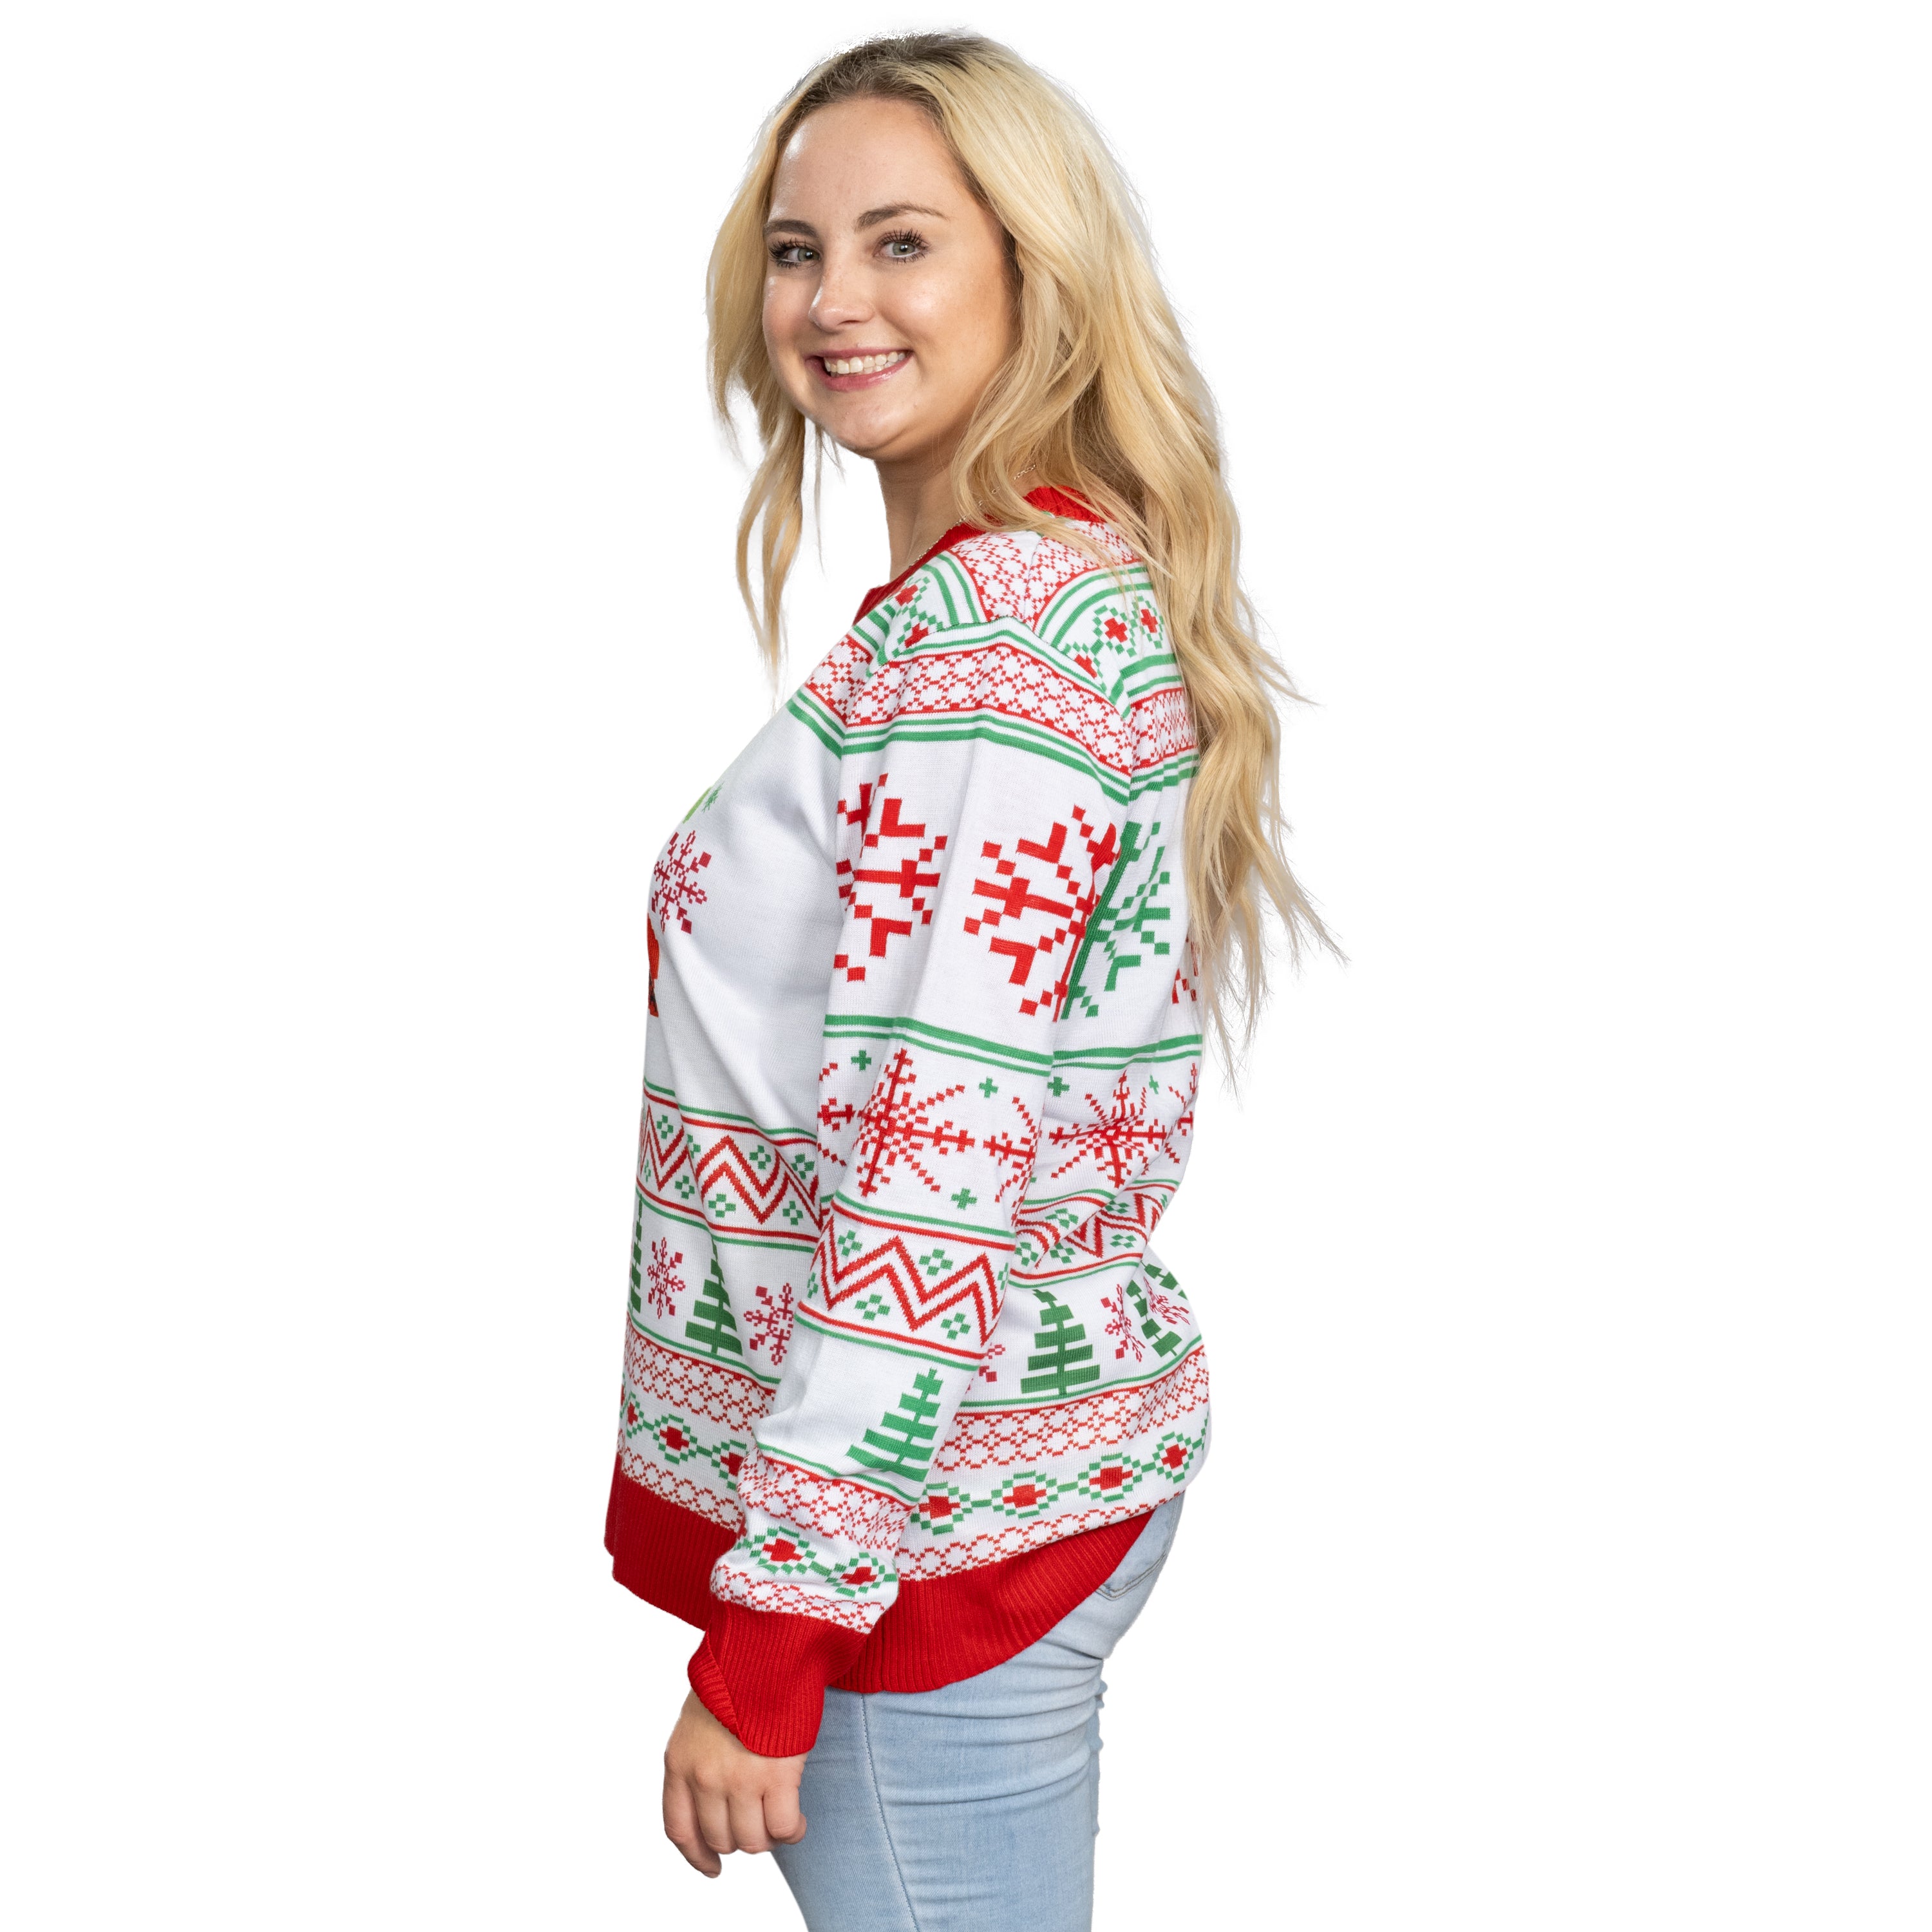 Best Friends Fair Isle Faces South Park Ugly Christmas Sweater